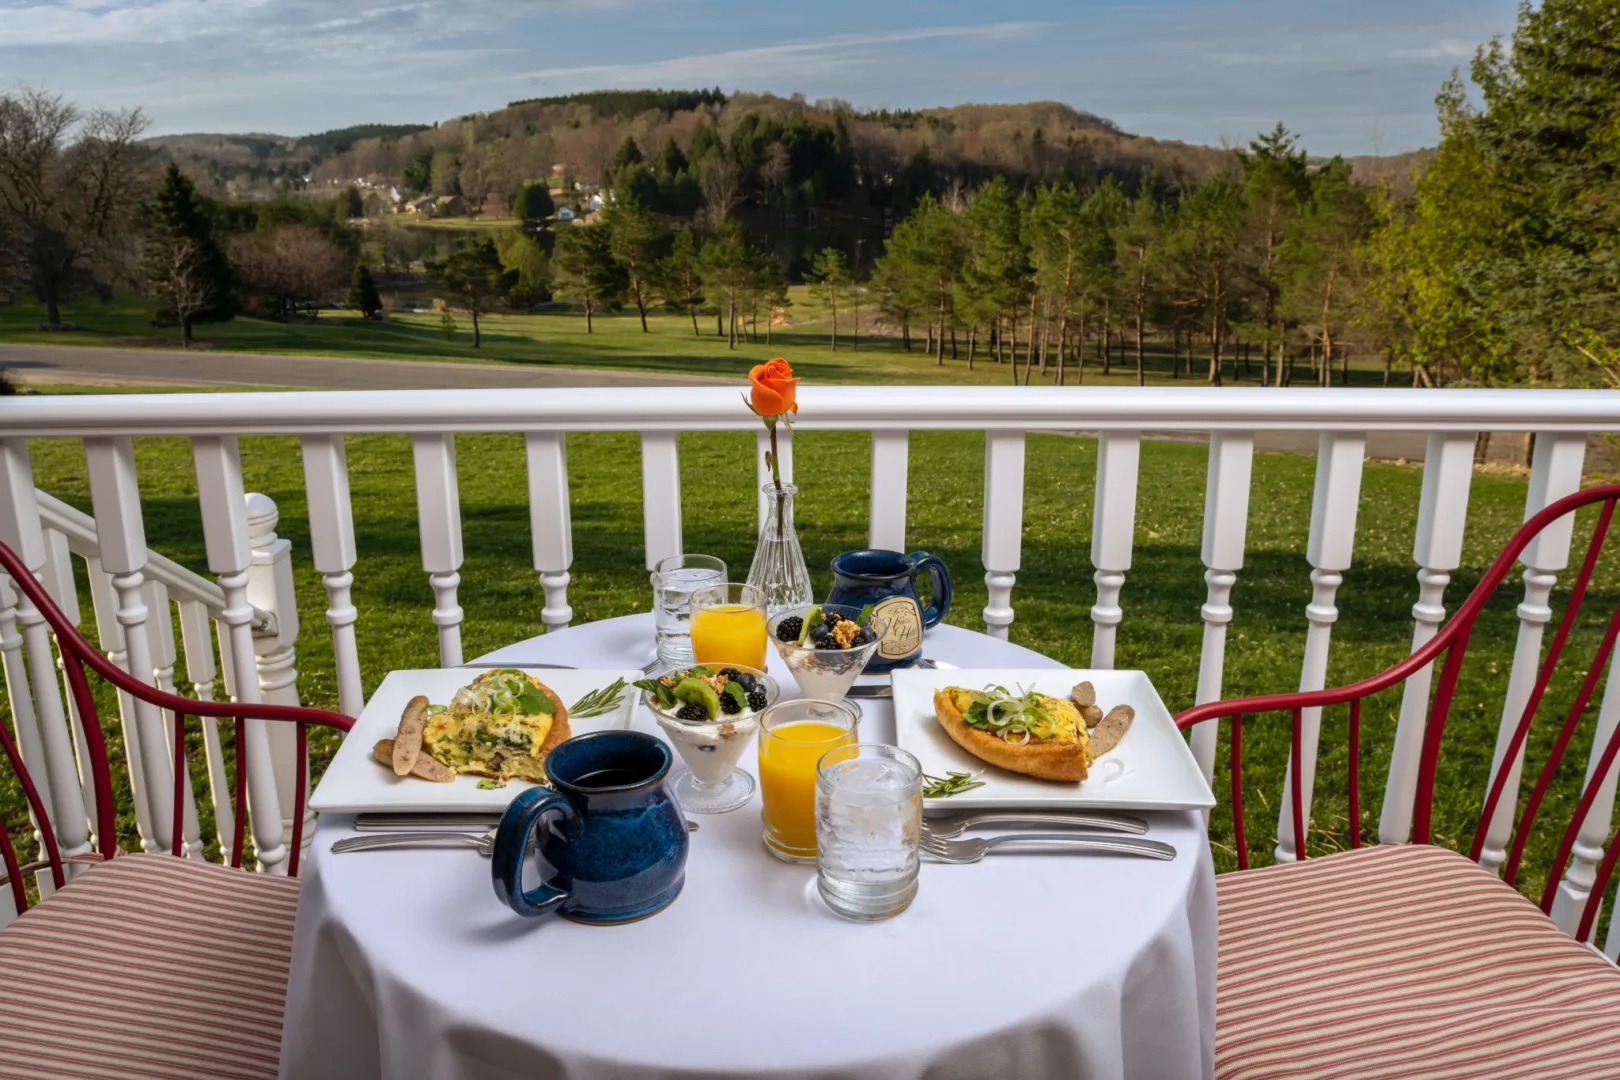 Breakfast setting for two on the porch at House on the Hill Bed and Breakfast Overlooking beautiful expansive grounds.